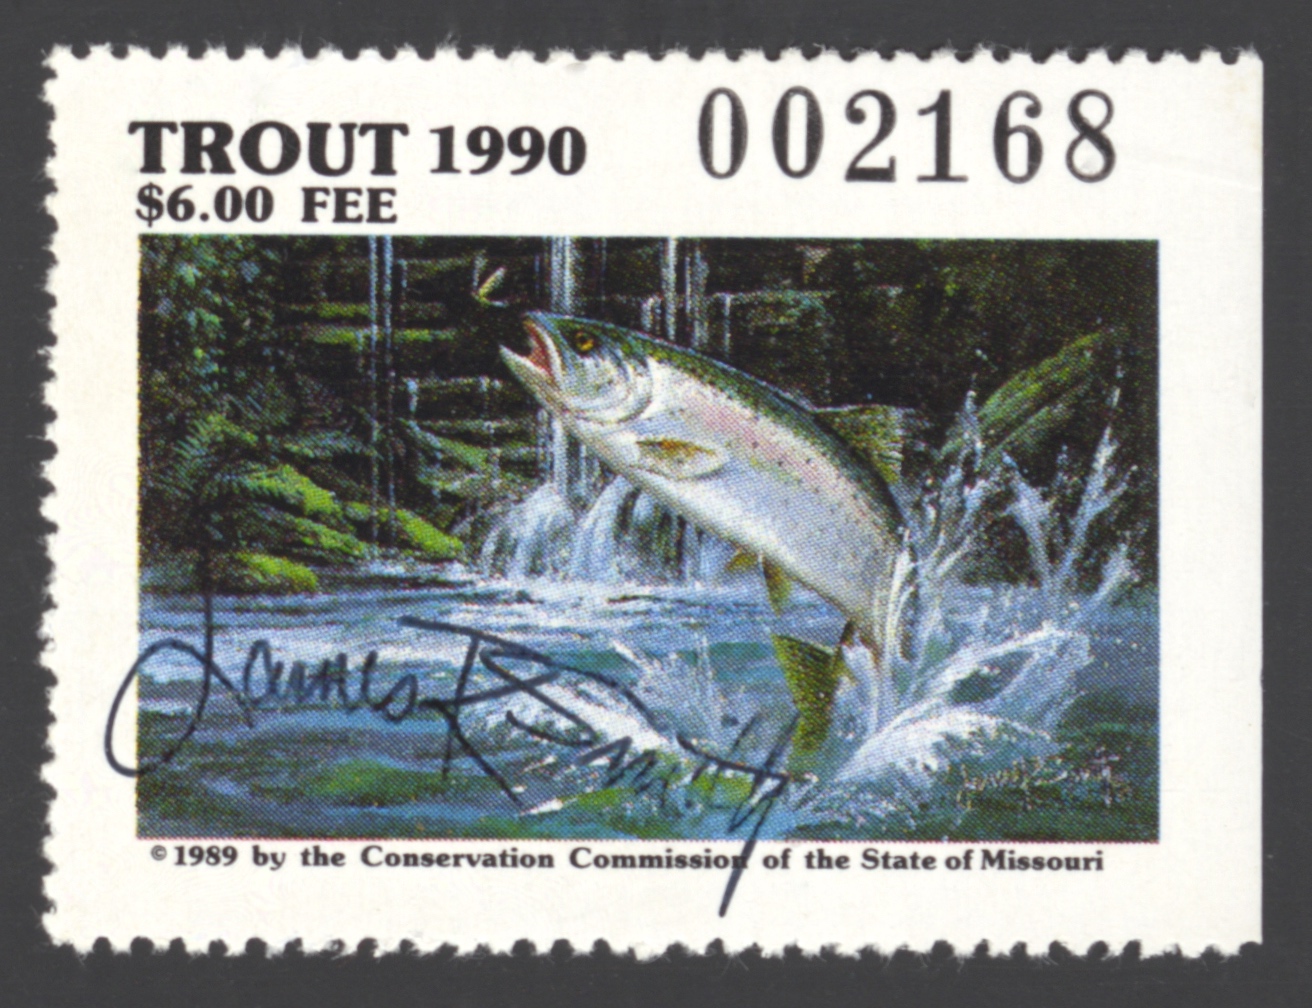 1990 Missouri Missouri Trout Stamp signed by James Smith